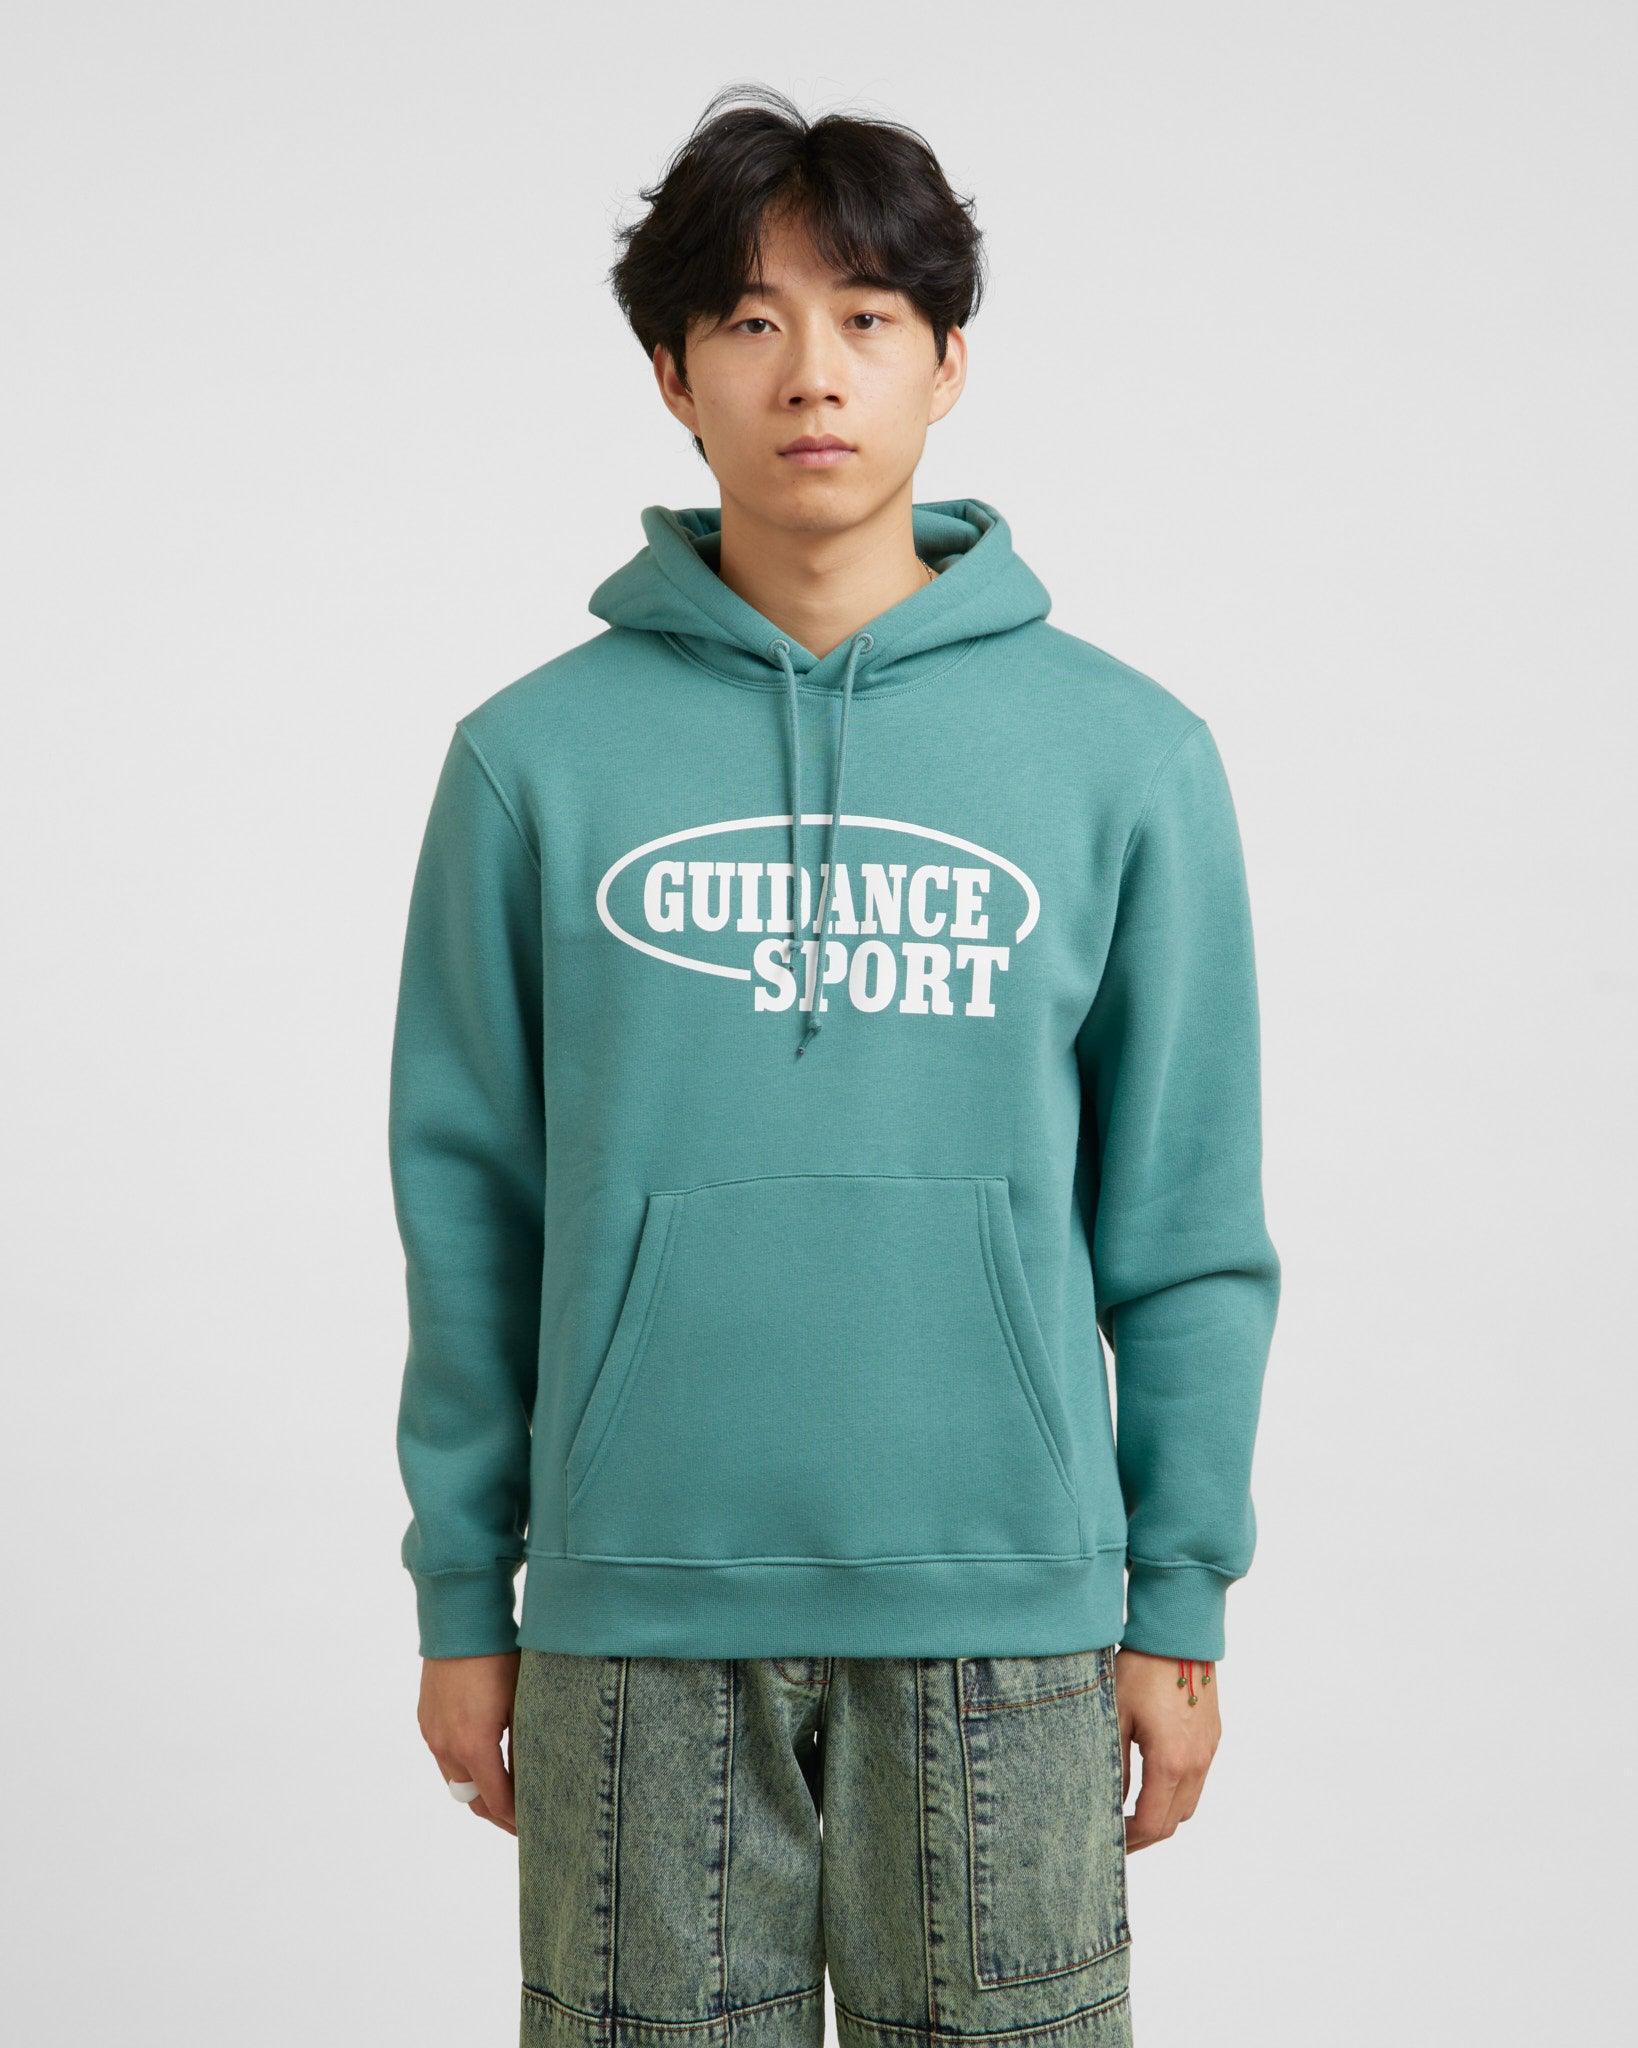 Guidance Sport Hoodie - {{ collection.title }} - Chinatown Country Club 